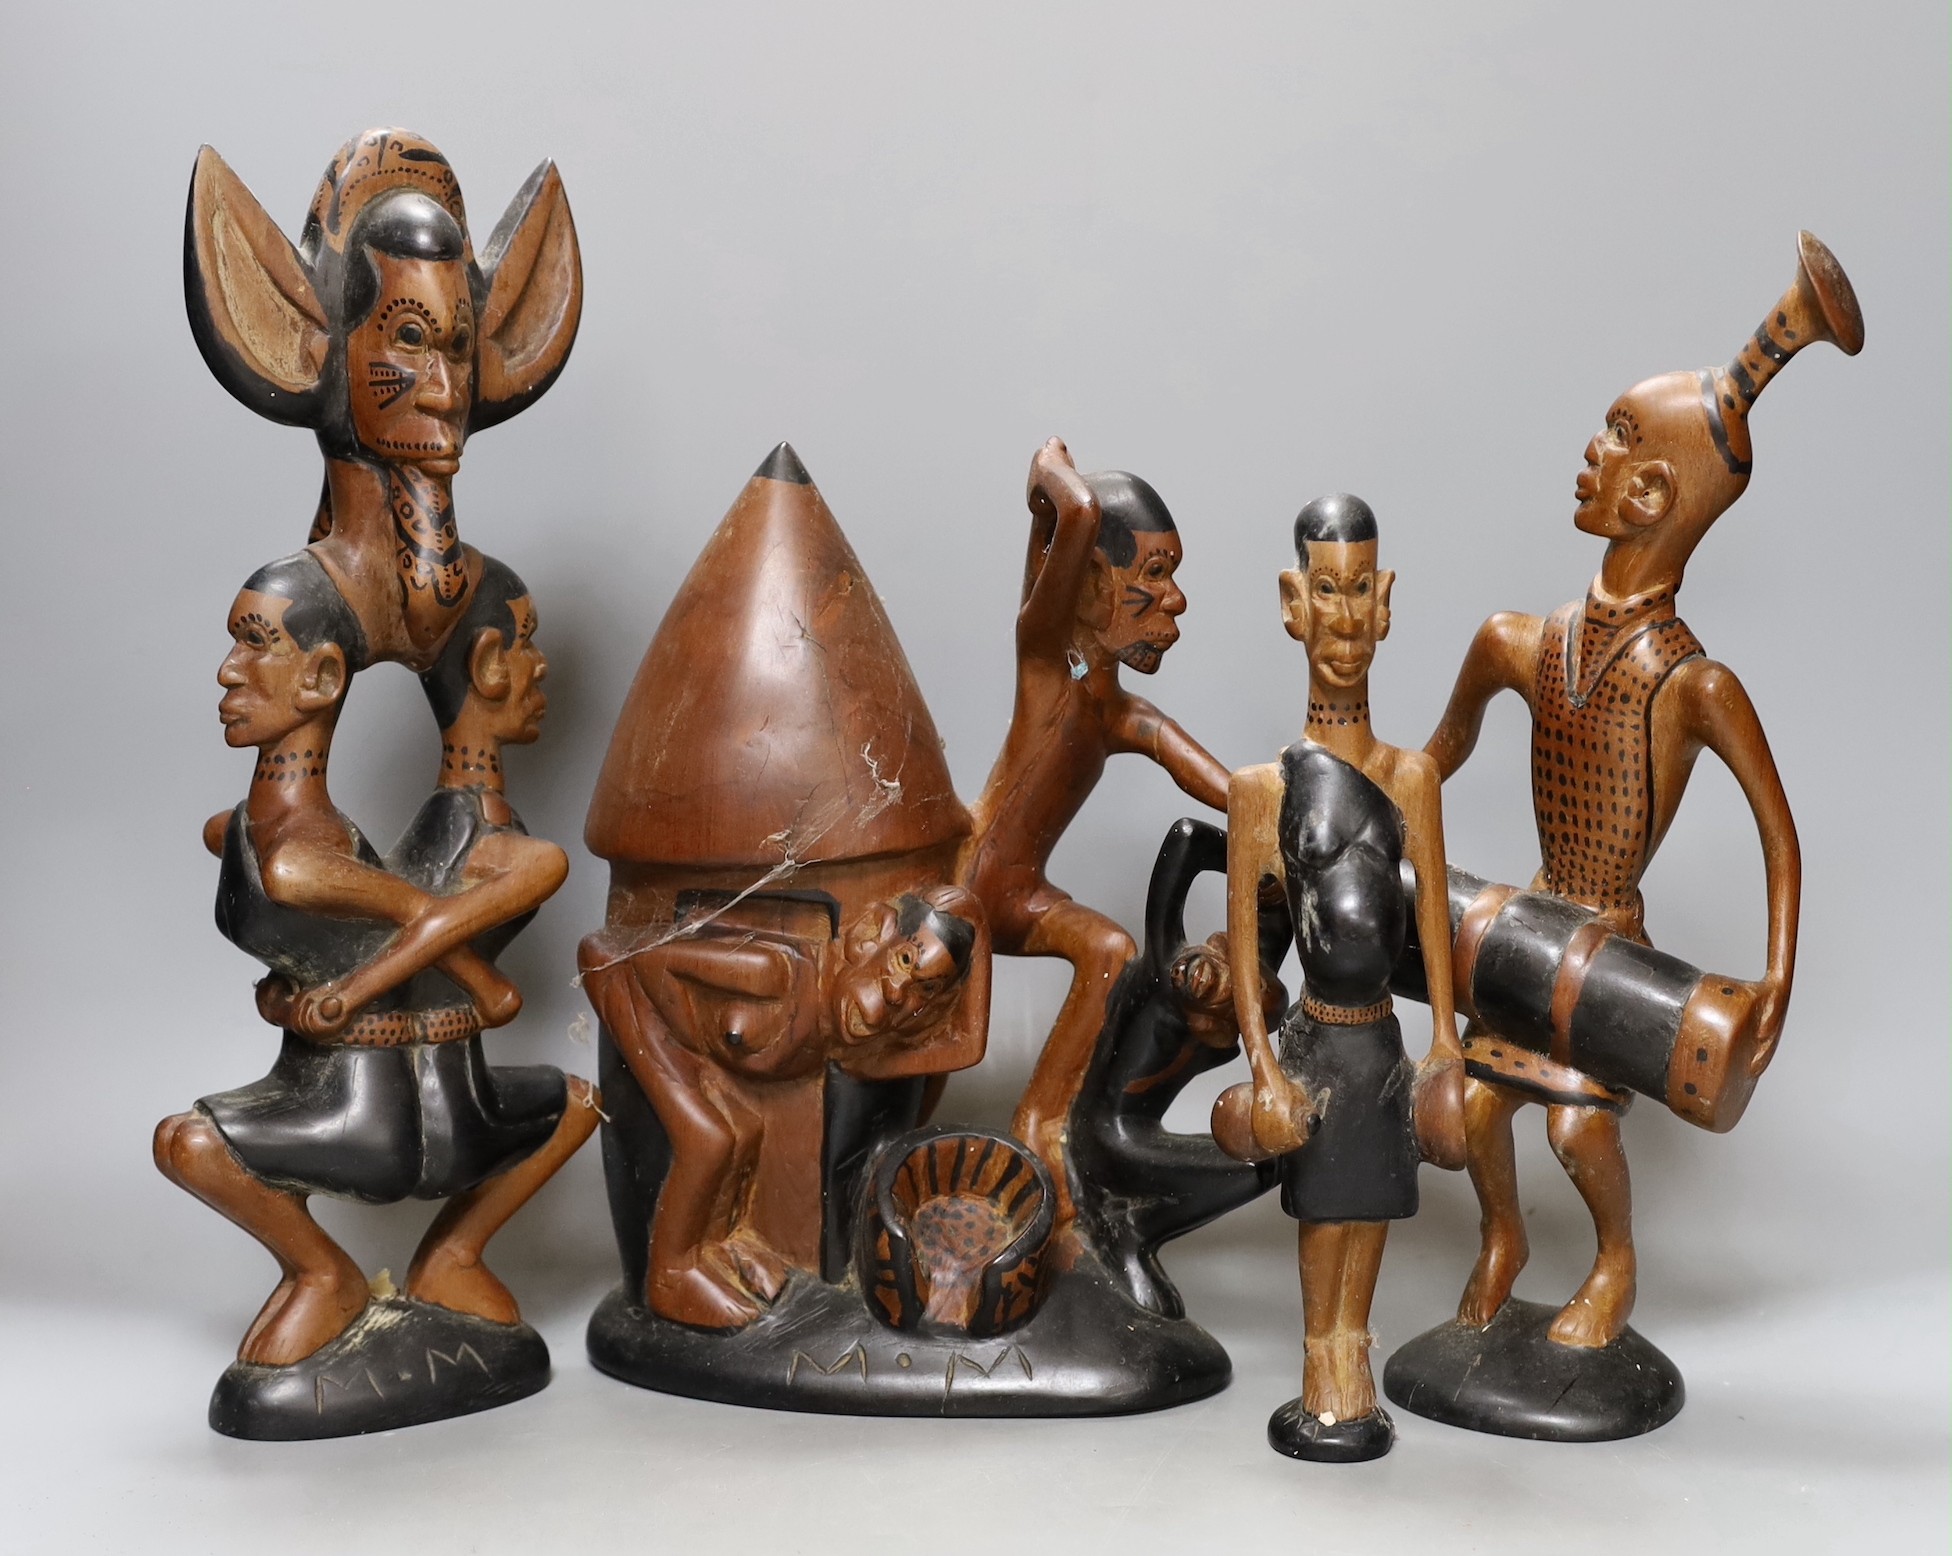 A narrative set of African wooden carvings, 35cm